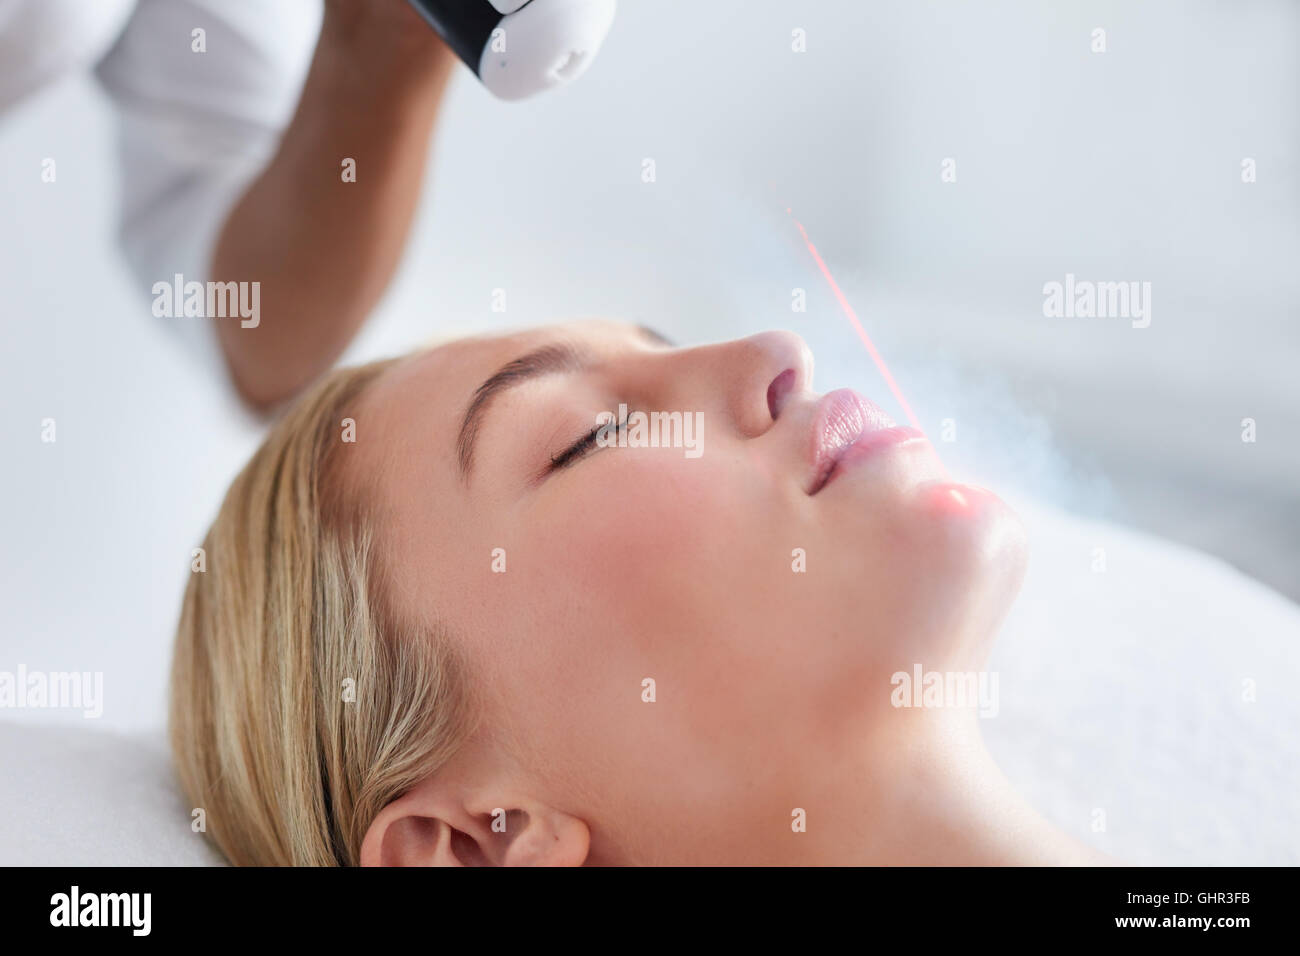 Close up of face of young woman receiving local cryotherapy. Beauty treatment using vaporized nitrogen. Stock Photo